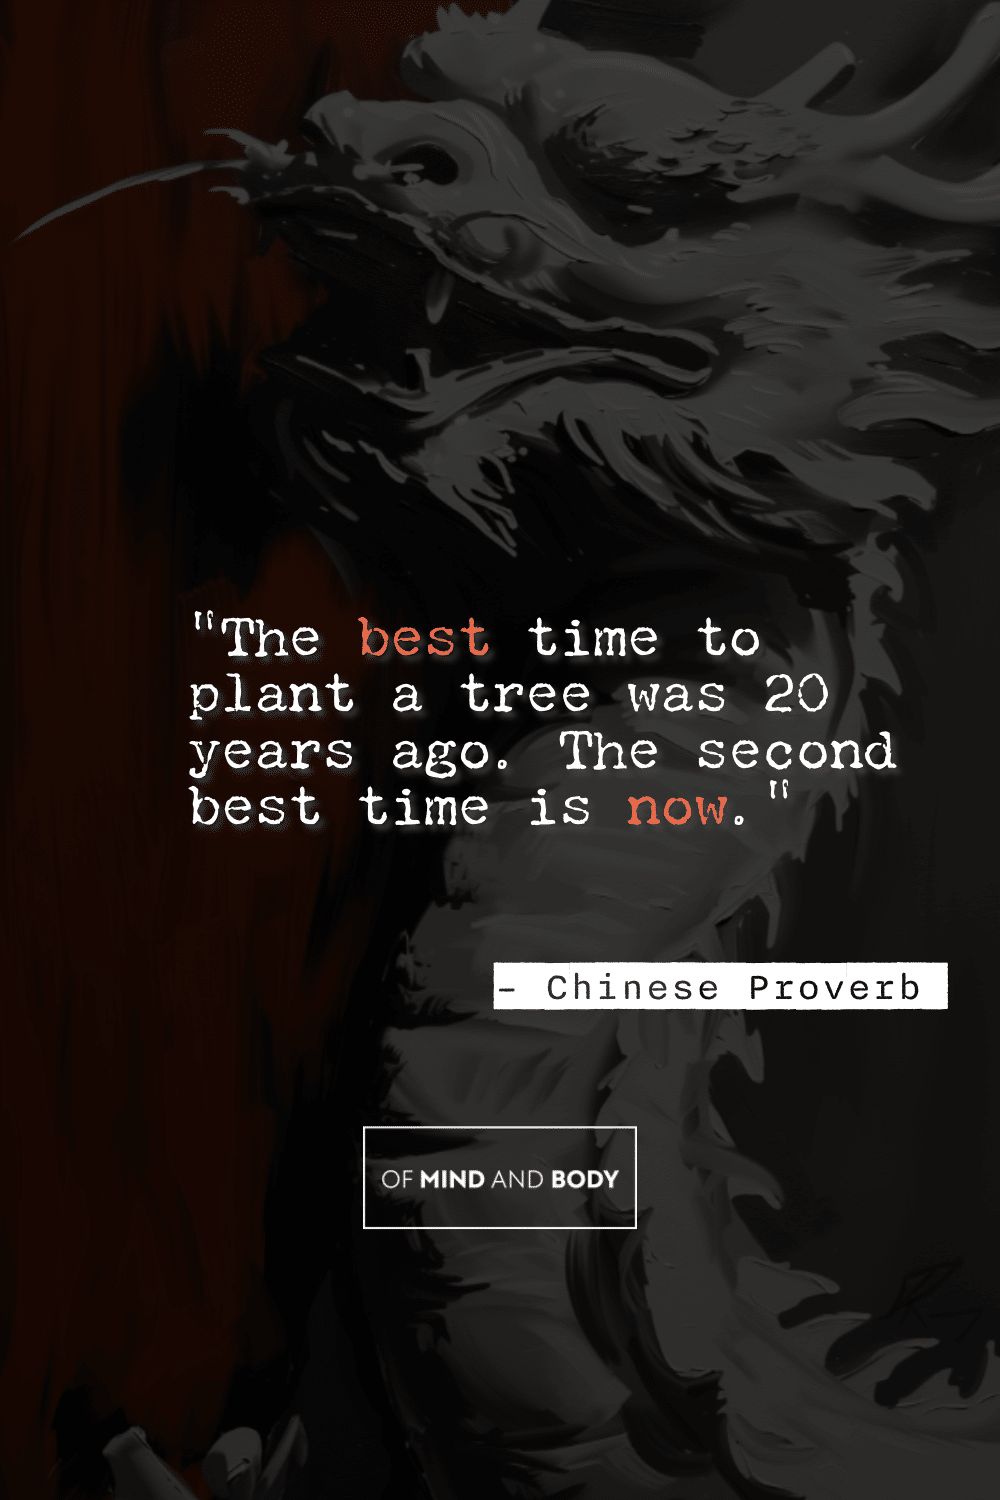 Quotes on Self Improvement - "The best time to plant a tree was 20 years ago. The second best time is now."